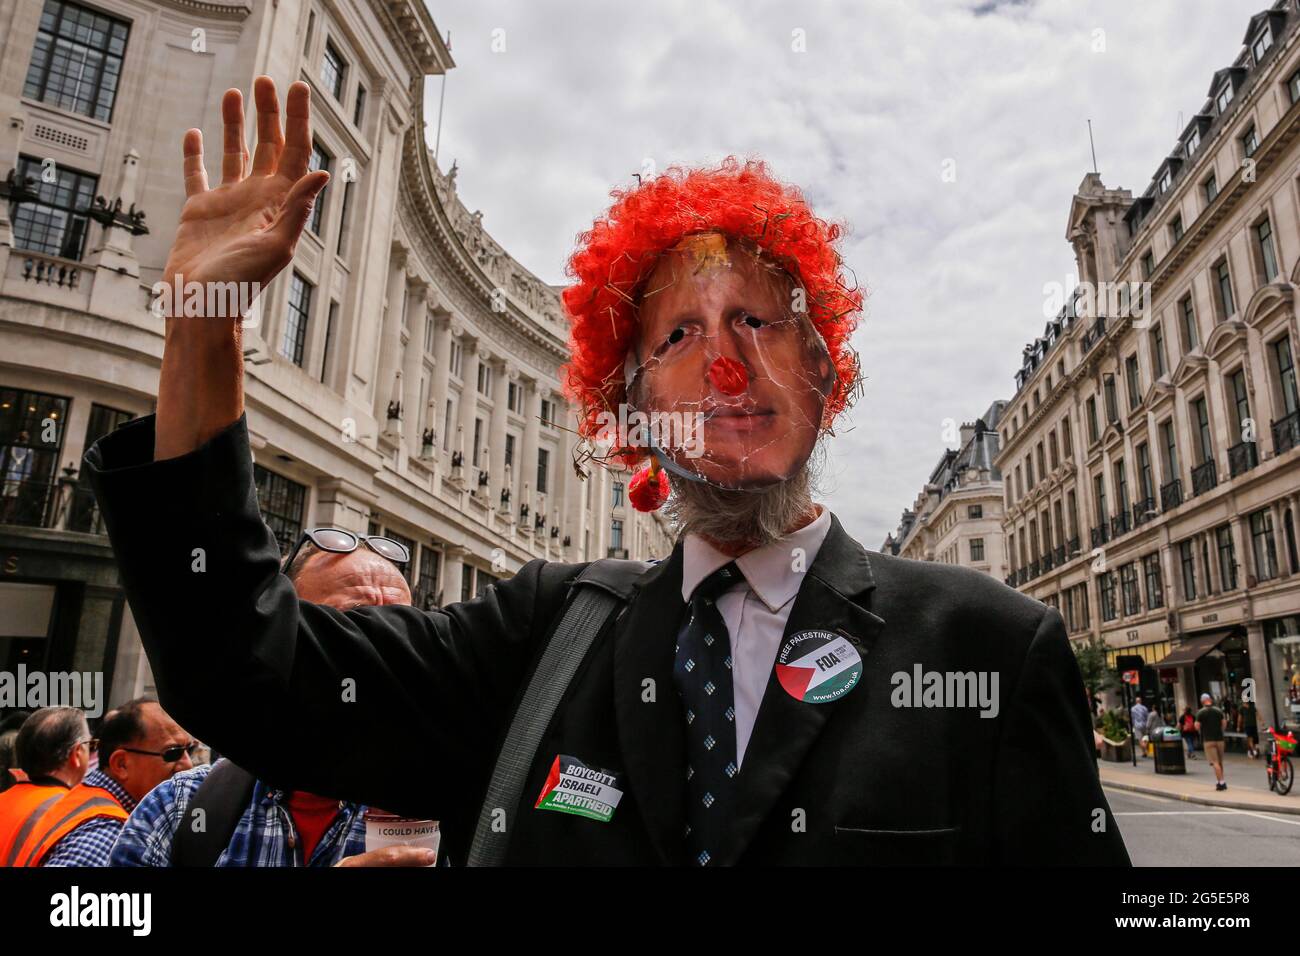 London,  UK on June 26, 2021: Anti-government activists  protest at Regent Street in the centre of the city. The protest unites activists from many opposition left wing movements such as Kill the Bill, The People's Assembly, NHS Staff Voices, Stop the War Coalition or Extintion Rebellion. Stock Photo